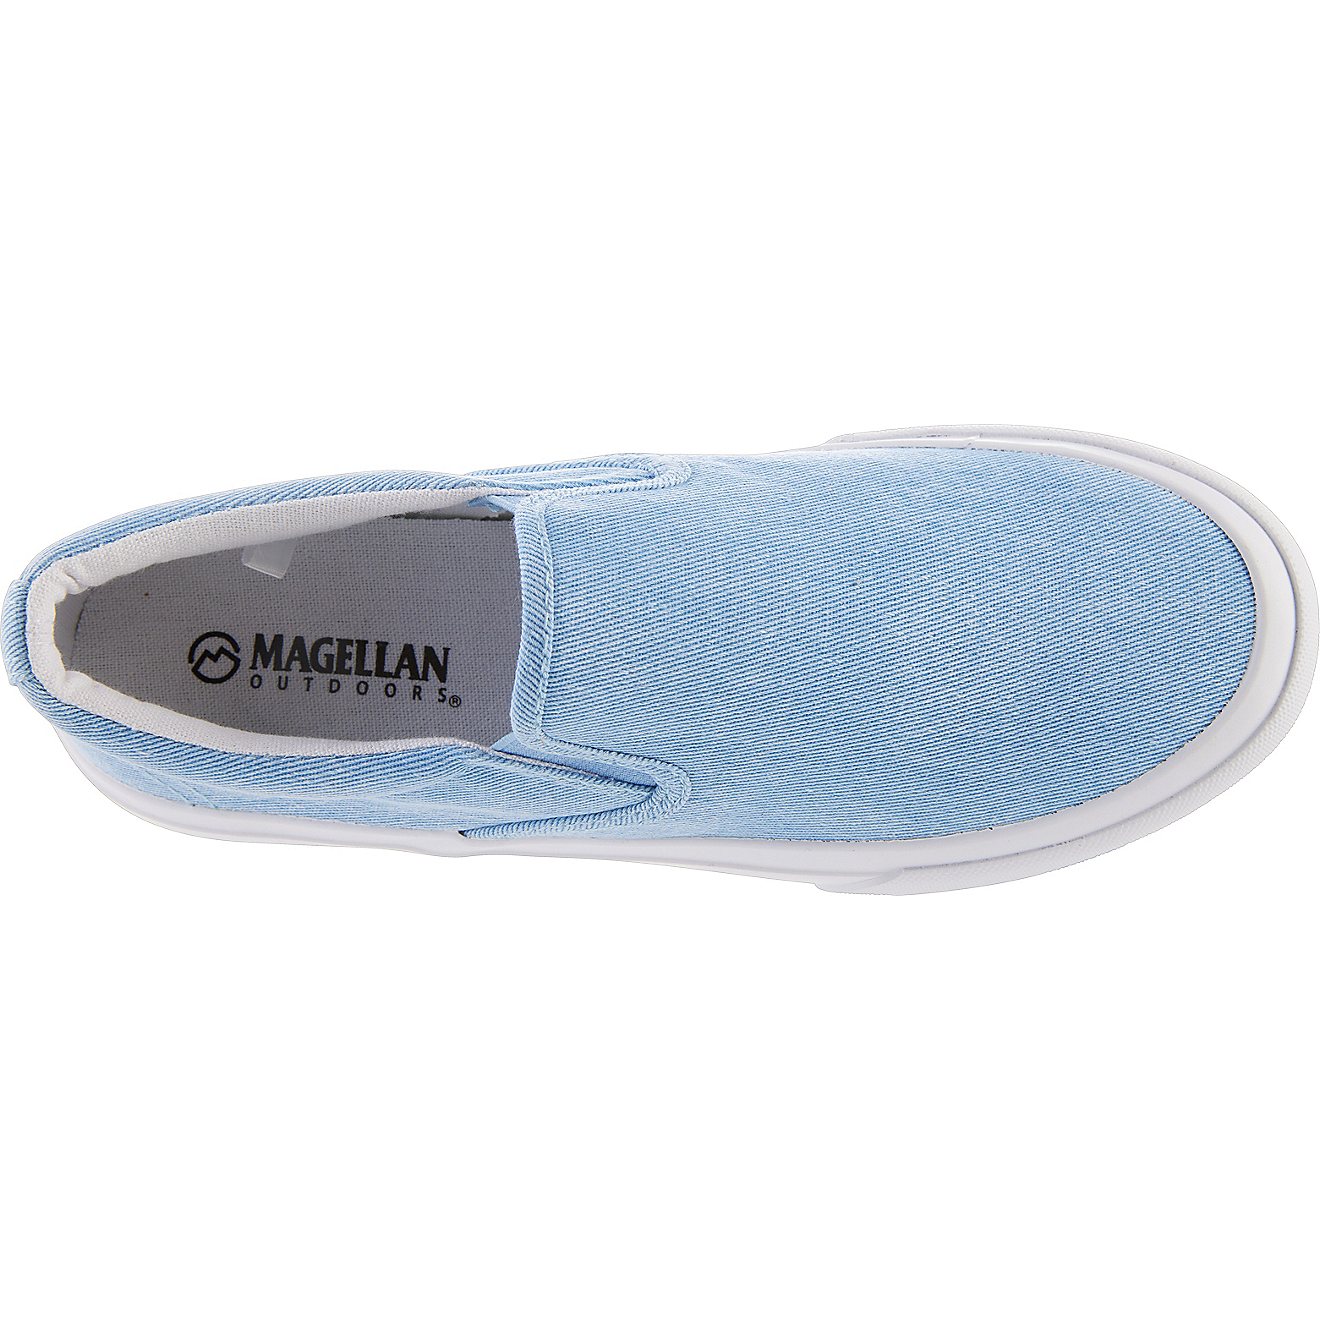 Magellan Outdoors Women's Washed Twill Tin Gore Slip-on Shoes | Academy